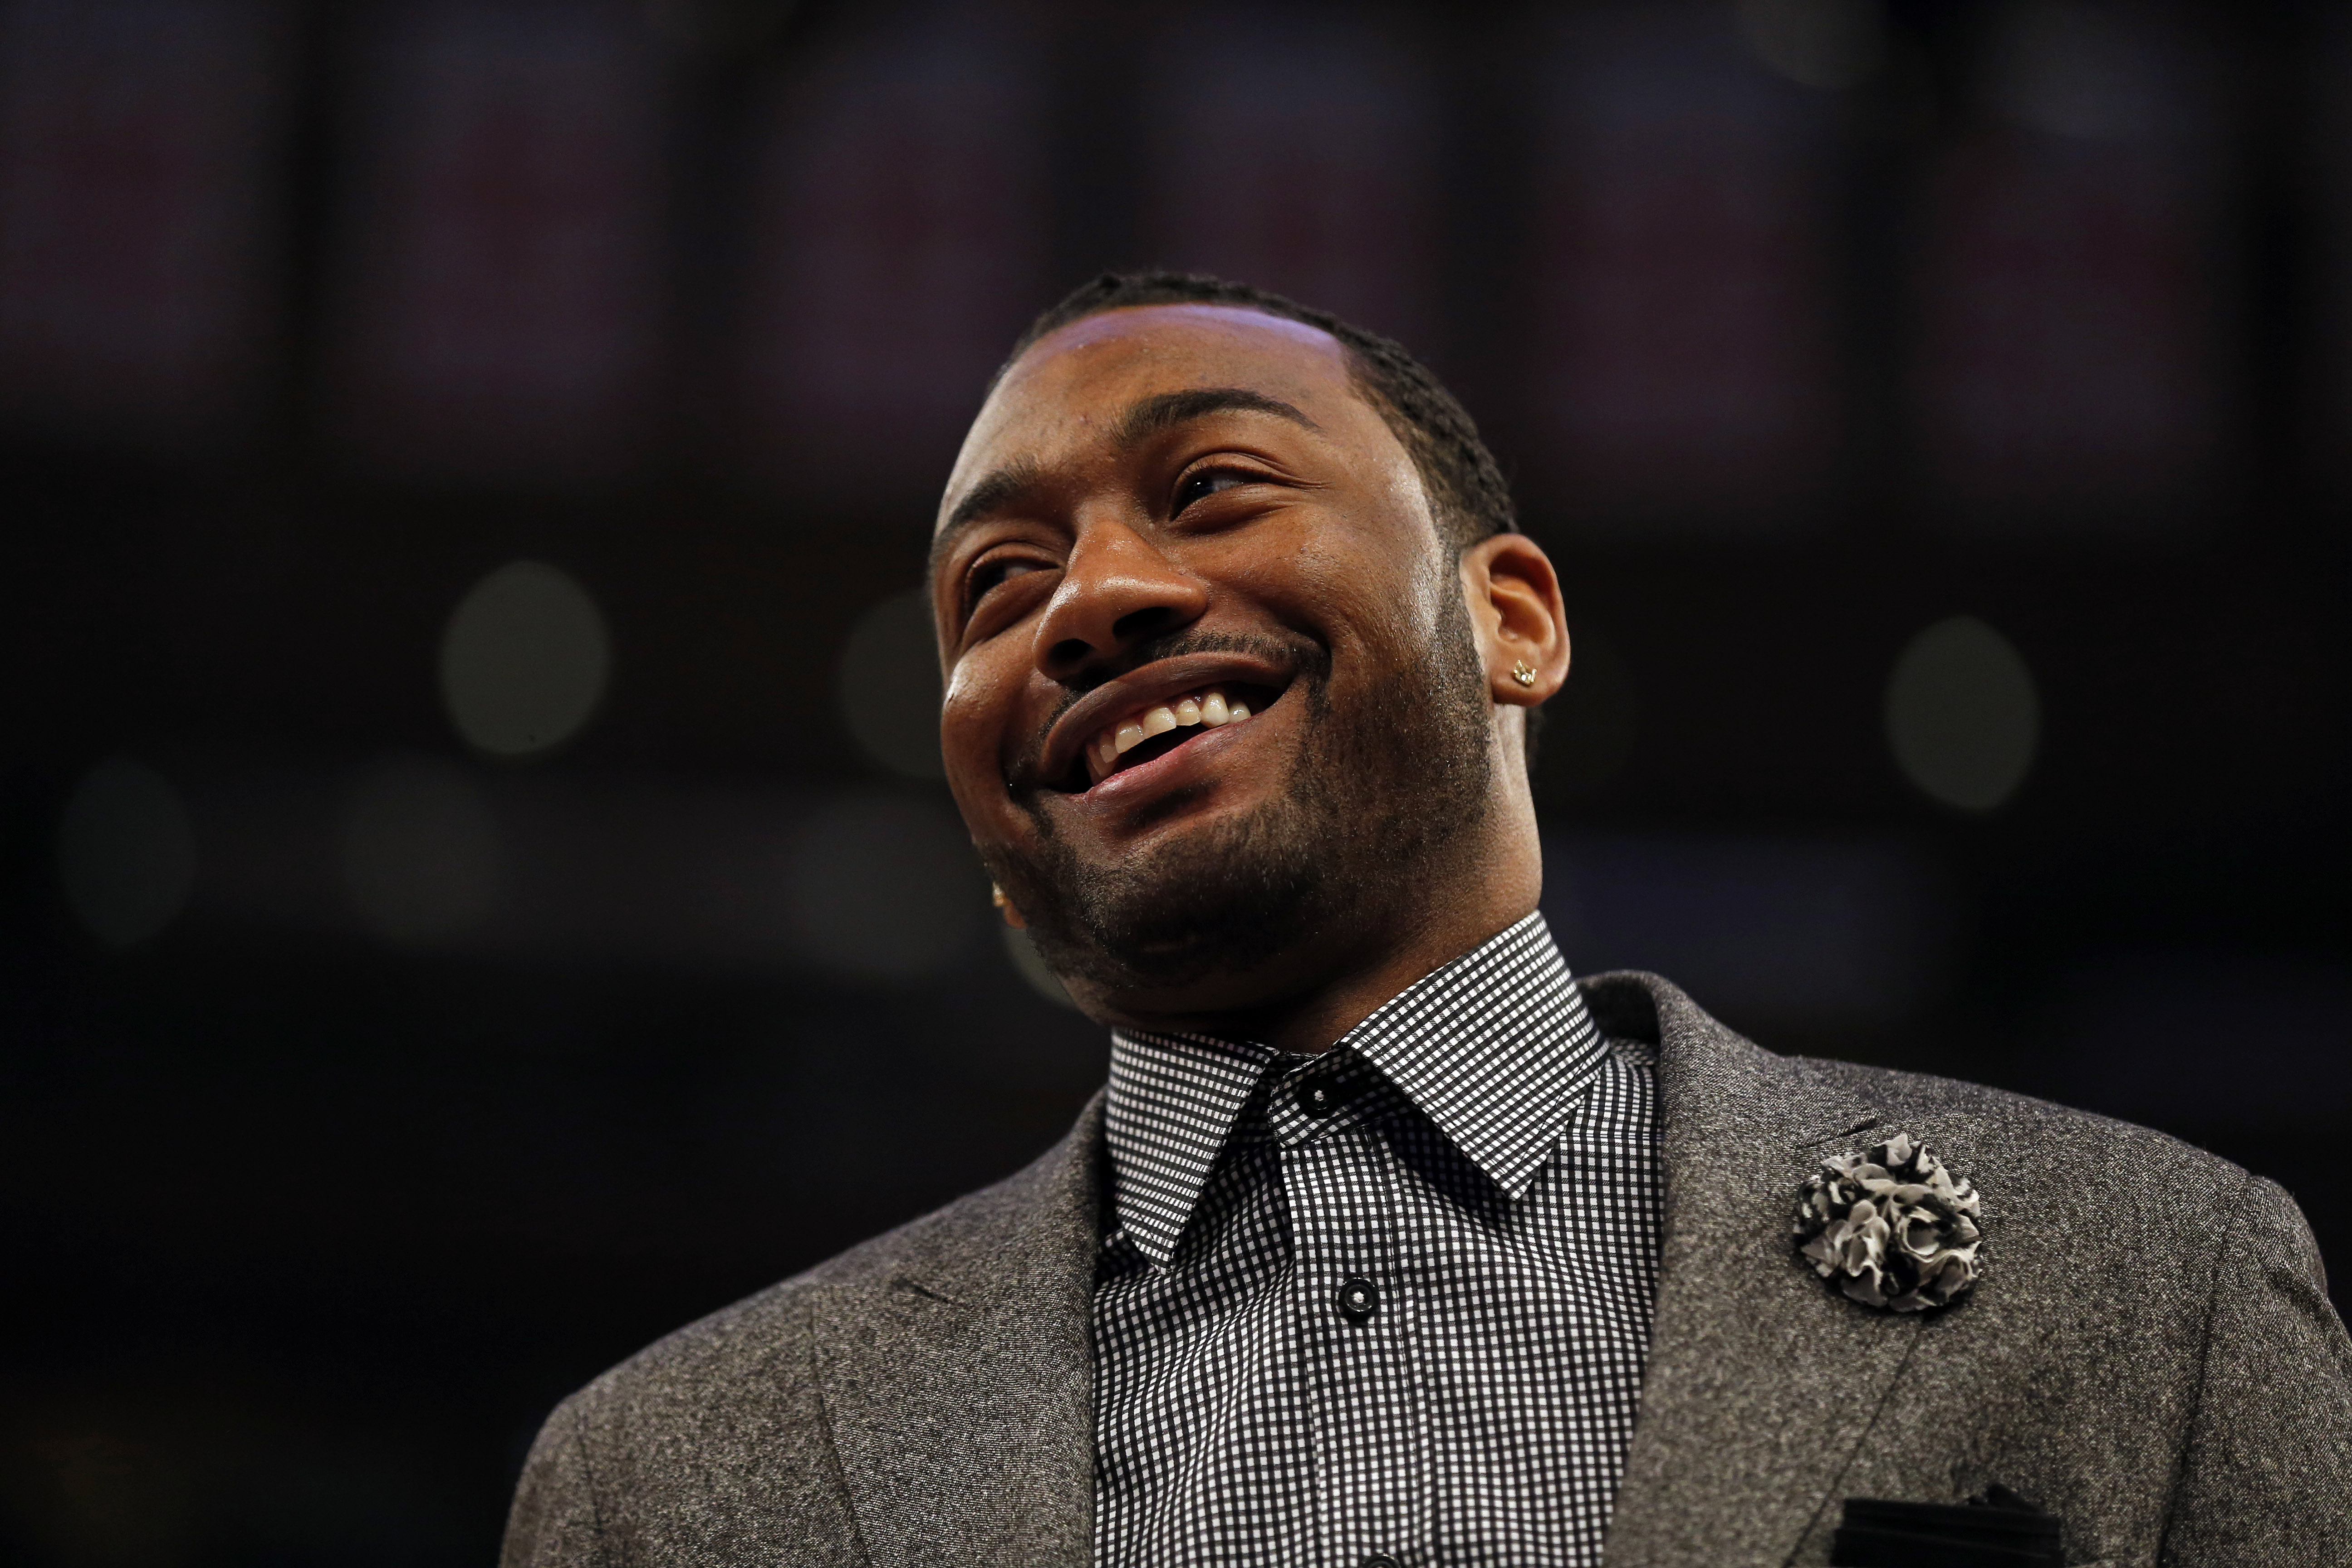 The John Wall–Led Wizards and the Three Other Teams Facing a